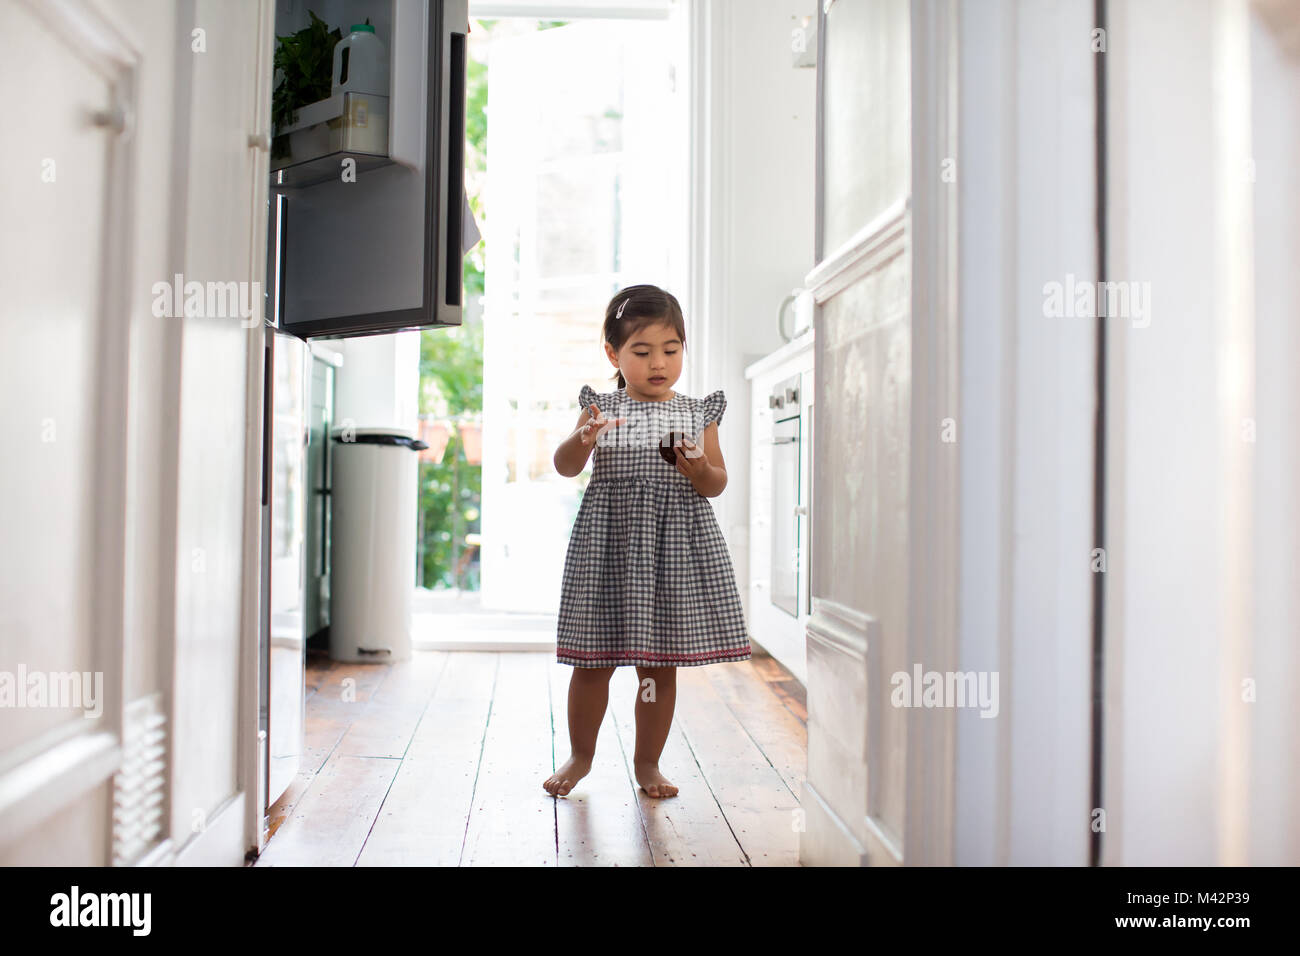 Girl taking a treat from a refrigerator Stock Photo